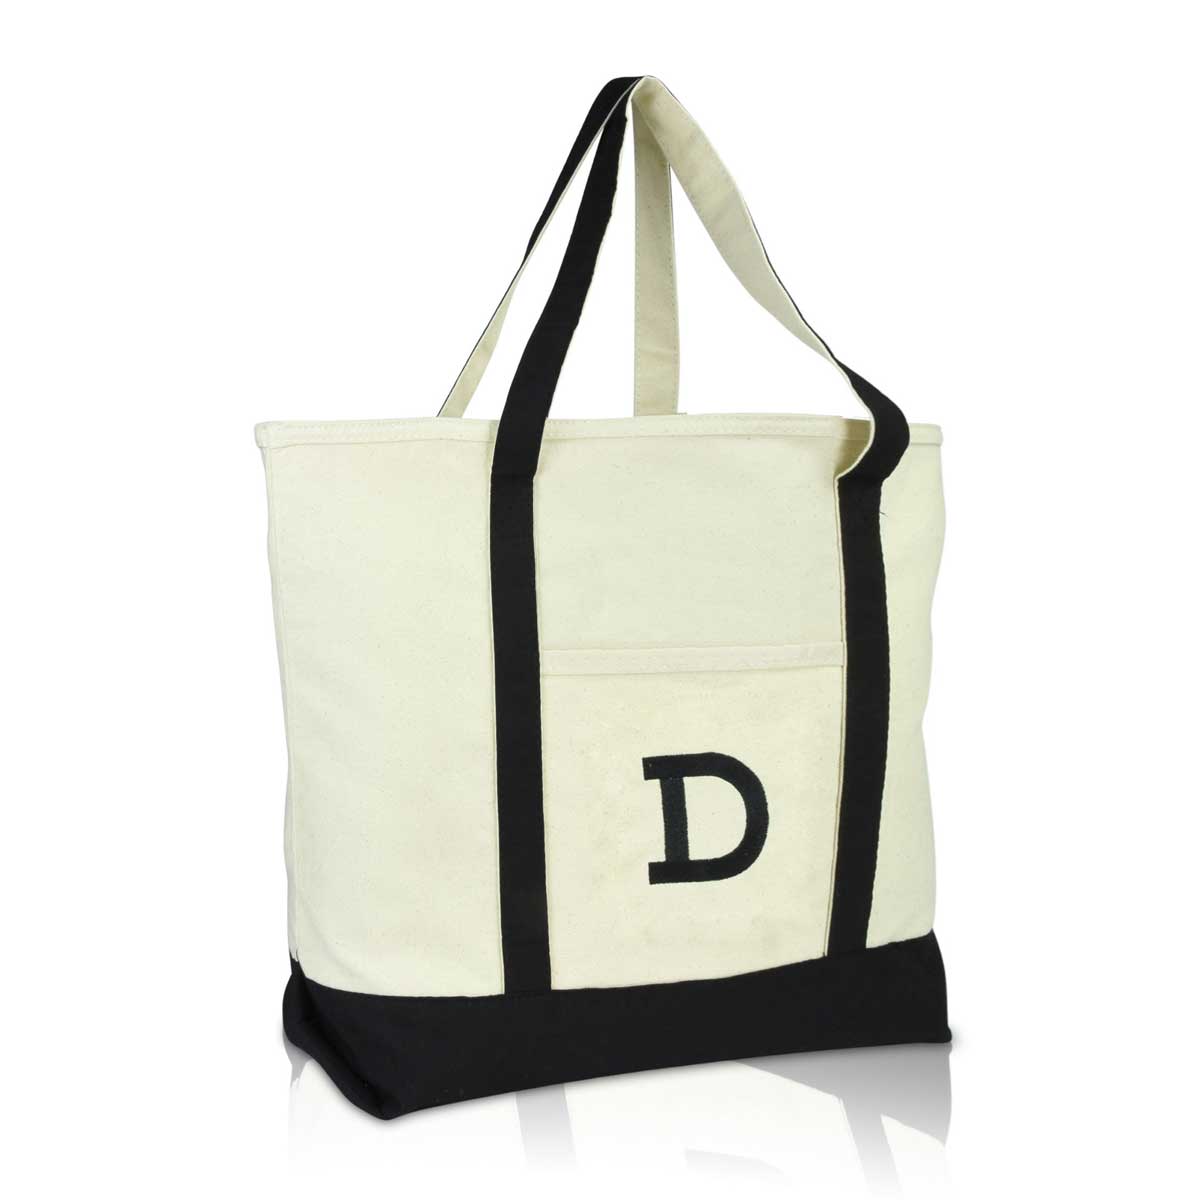 Dalix Quality Canvas Tote Bags Large Beach Bags Navy Blue Monogrammed S